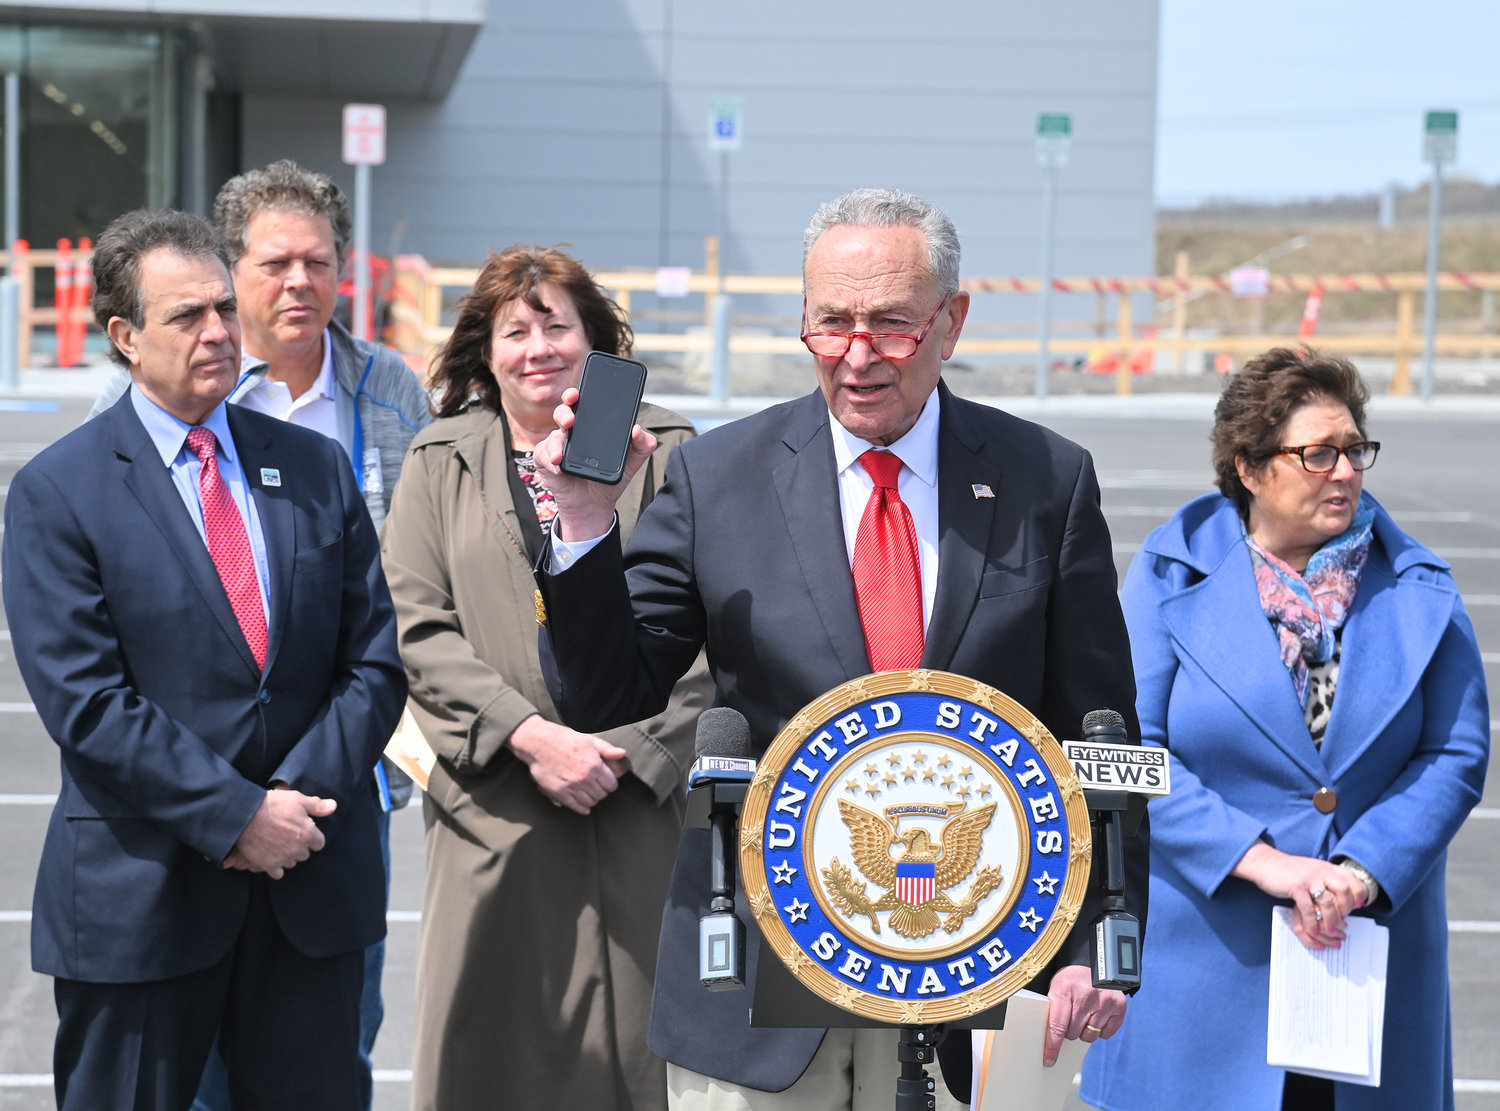 NEEDS CHIPS — U.S. Sen. Charles E. Schumer holds up a smartphone that uses the chips that will be produced at a chip fab facility like Wolfspeed during his press conference in Marcy on Monday.